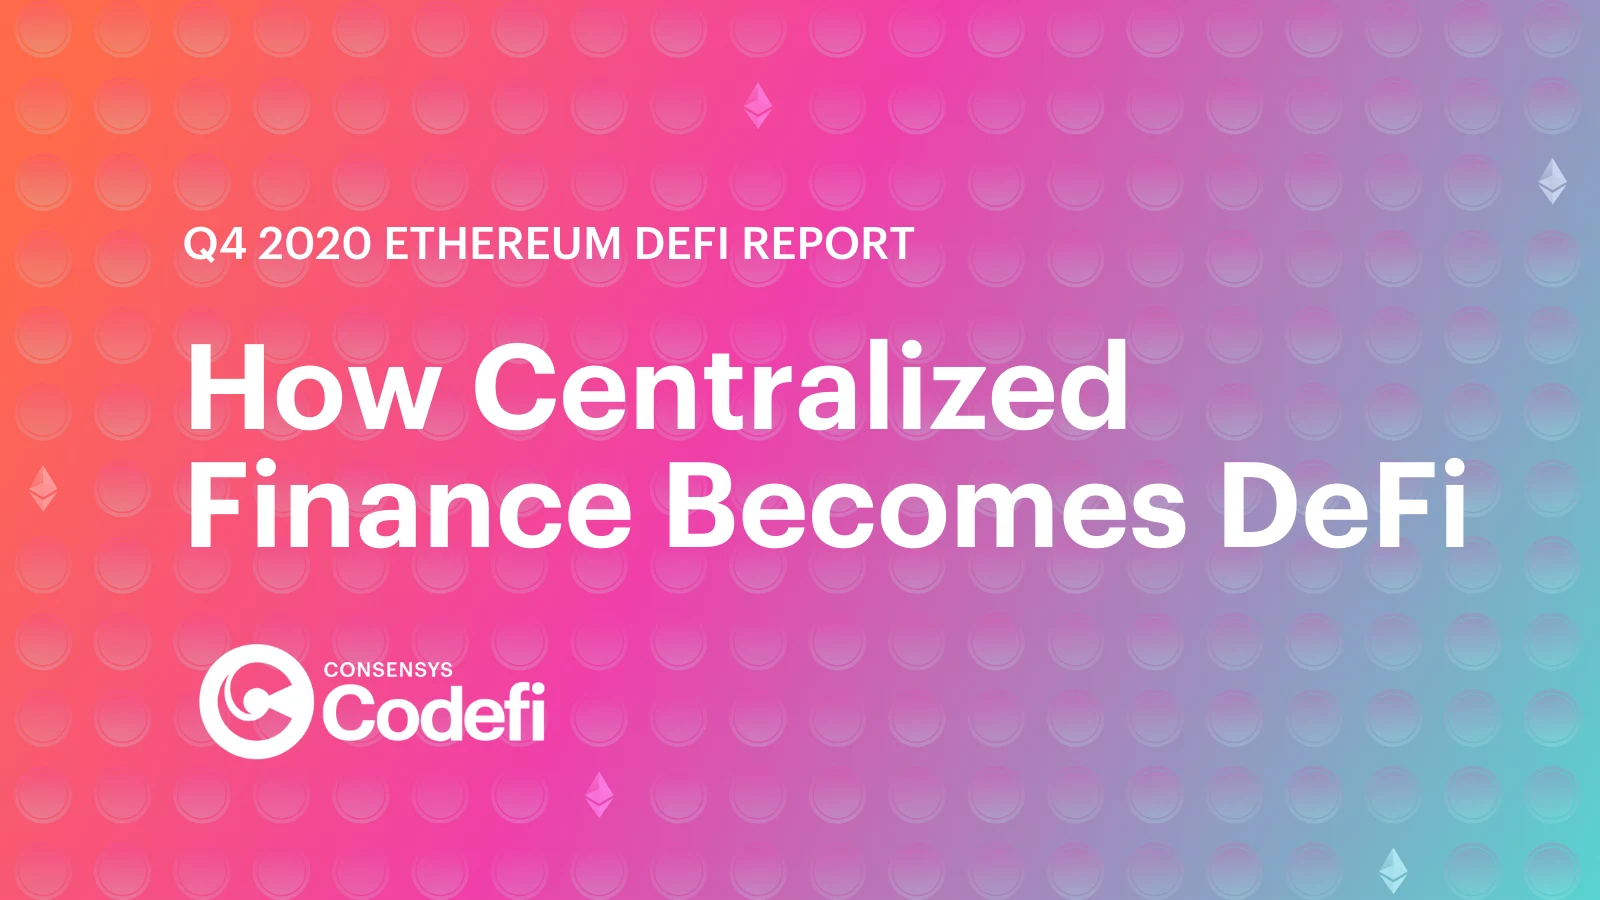 Image: What will it take for centralized finance to embrace decentralized finance?